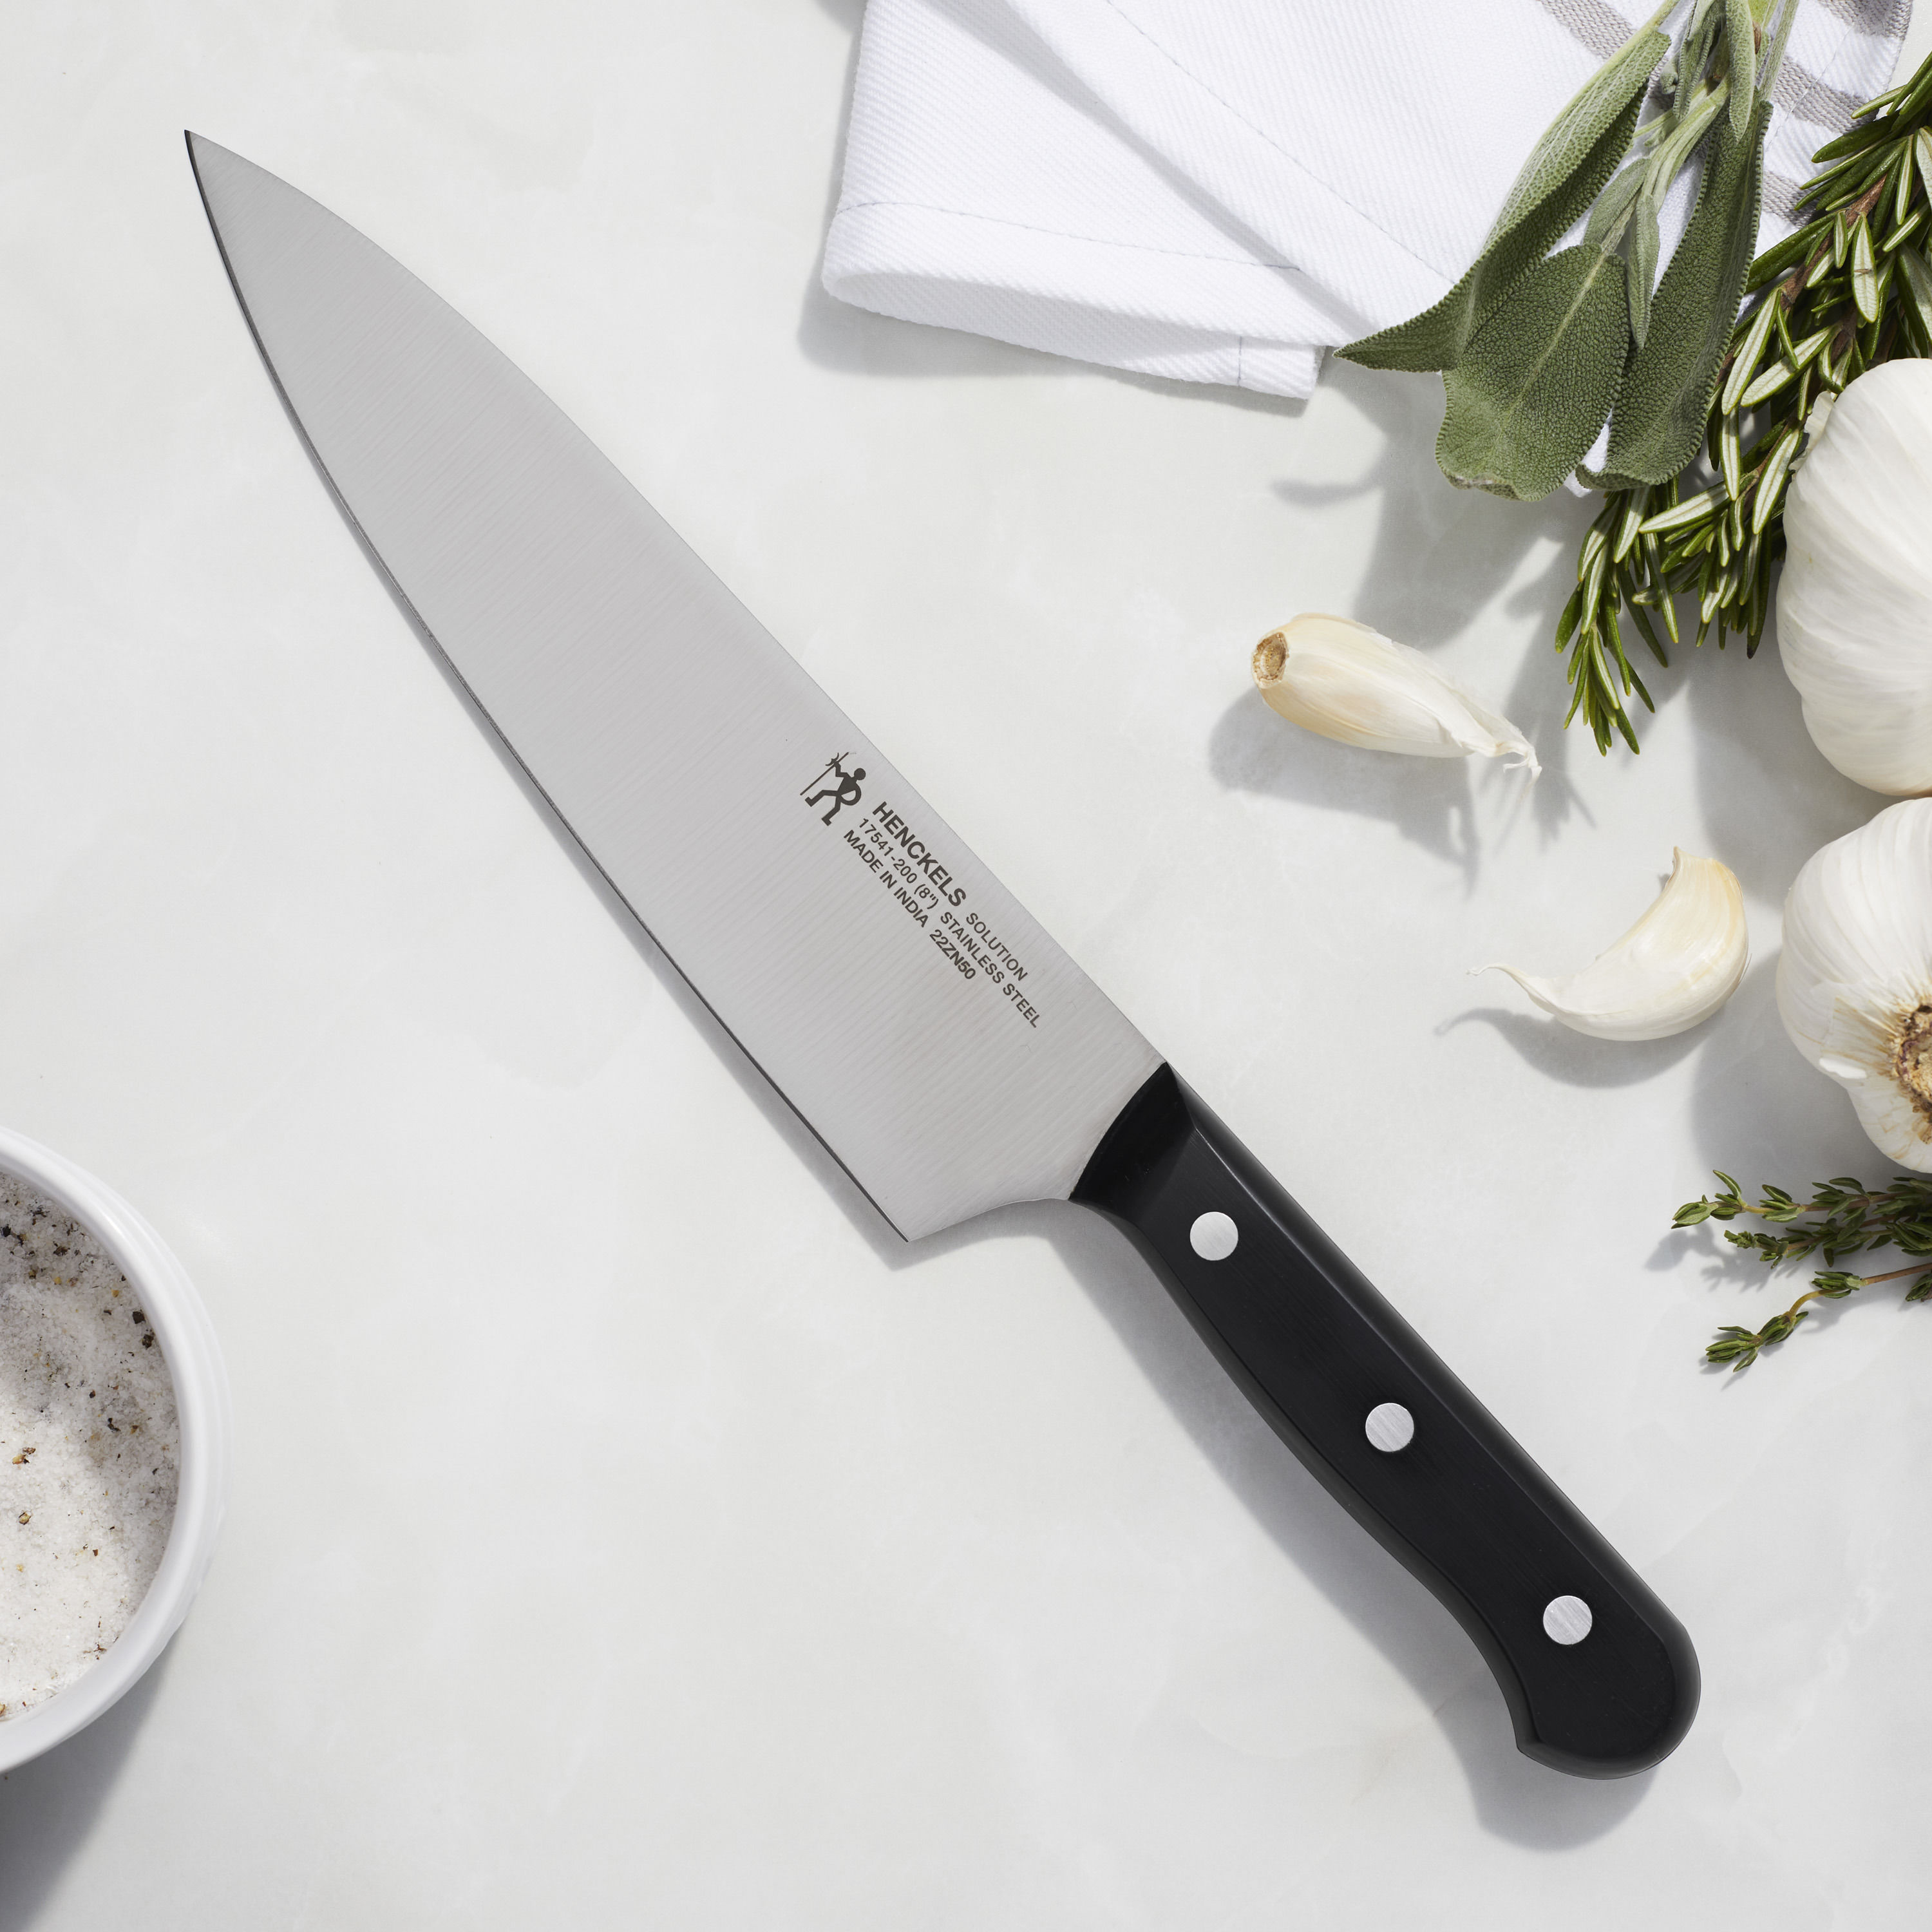 JERO Stainless Steel Kitchen Shears with Holder - Perfect For Herbs, Floral  Trimming and Kitchen Use - Made In Portgual White